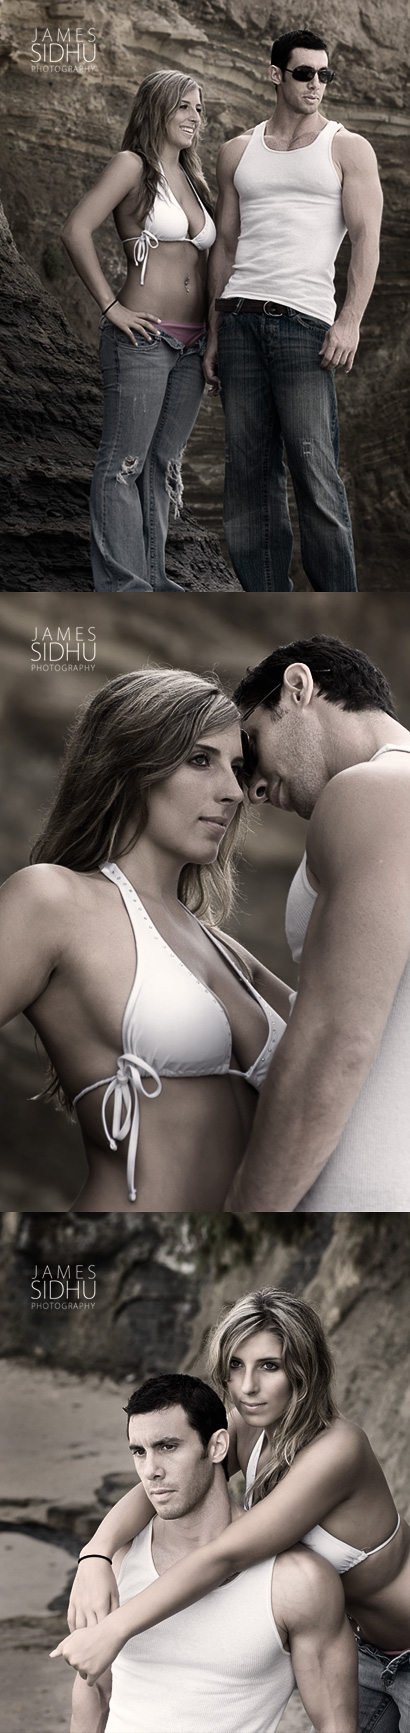 Male and Female model photo shoot of James Sidhu, -Sophia Marie- and Ten Eighty in sunset cliffs, san diego